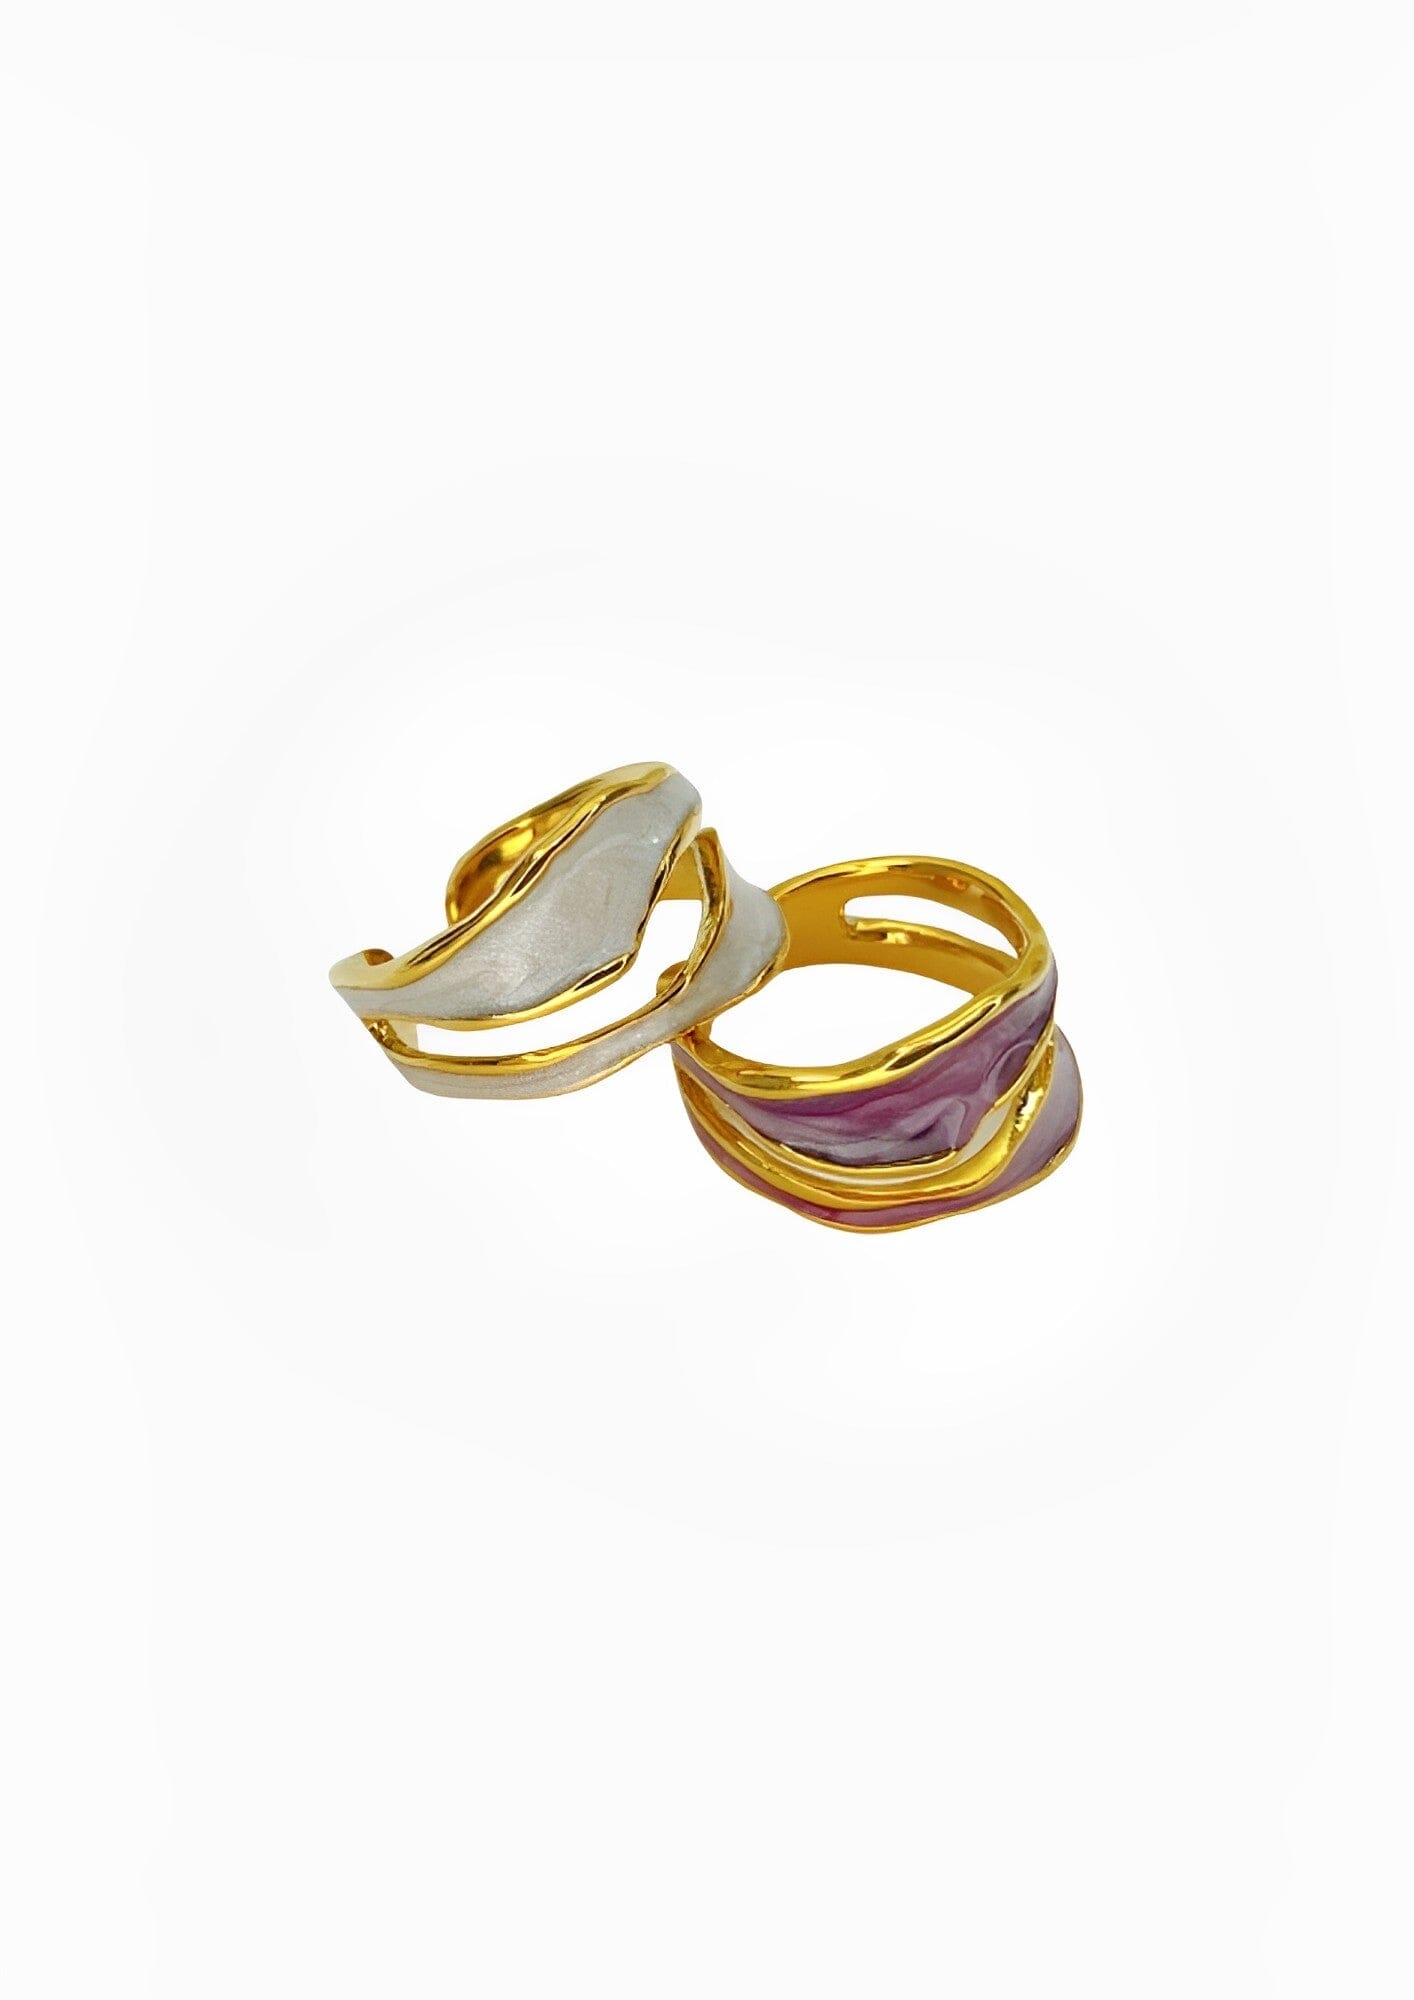 ENAMELO RING earing Yubama Jewelry Online Store - The Elegant Designs of Gold and Silver ! 